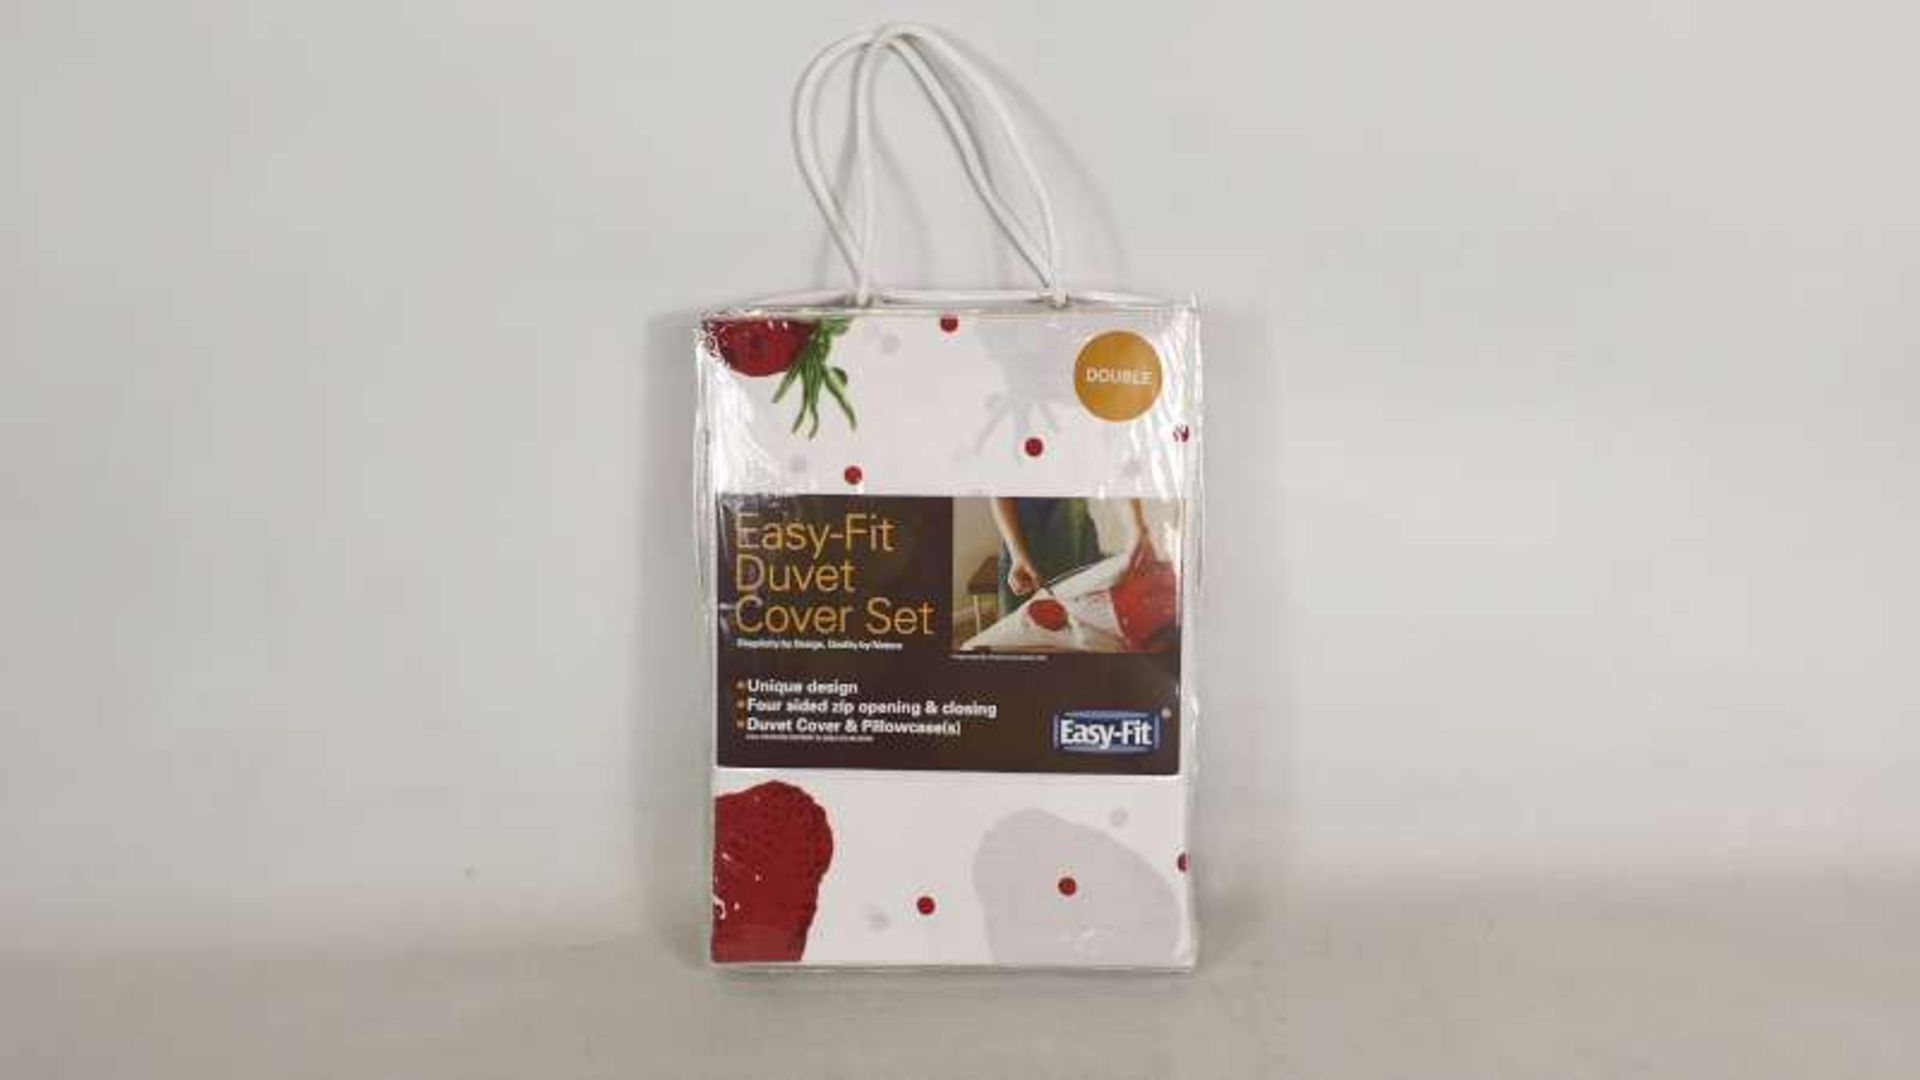 6 X BRAND NEW EASY-FIT DOUBLE SIZE STRAWBERRY DUVET SET WITH FOUR SIDED ZIP OPENING & CLOSING + 2